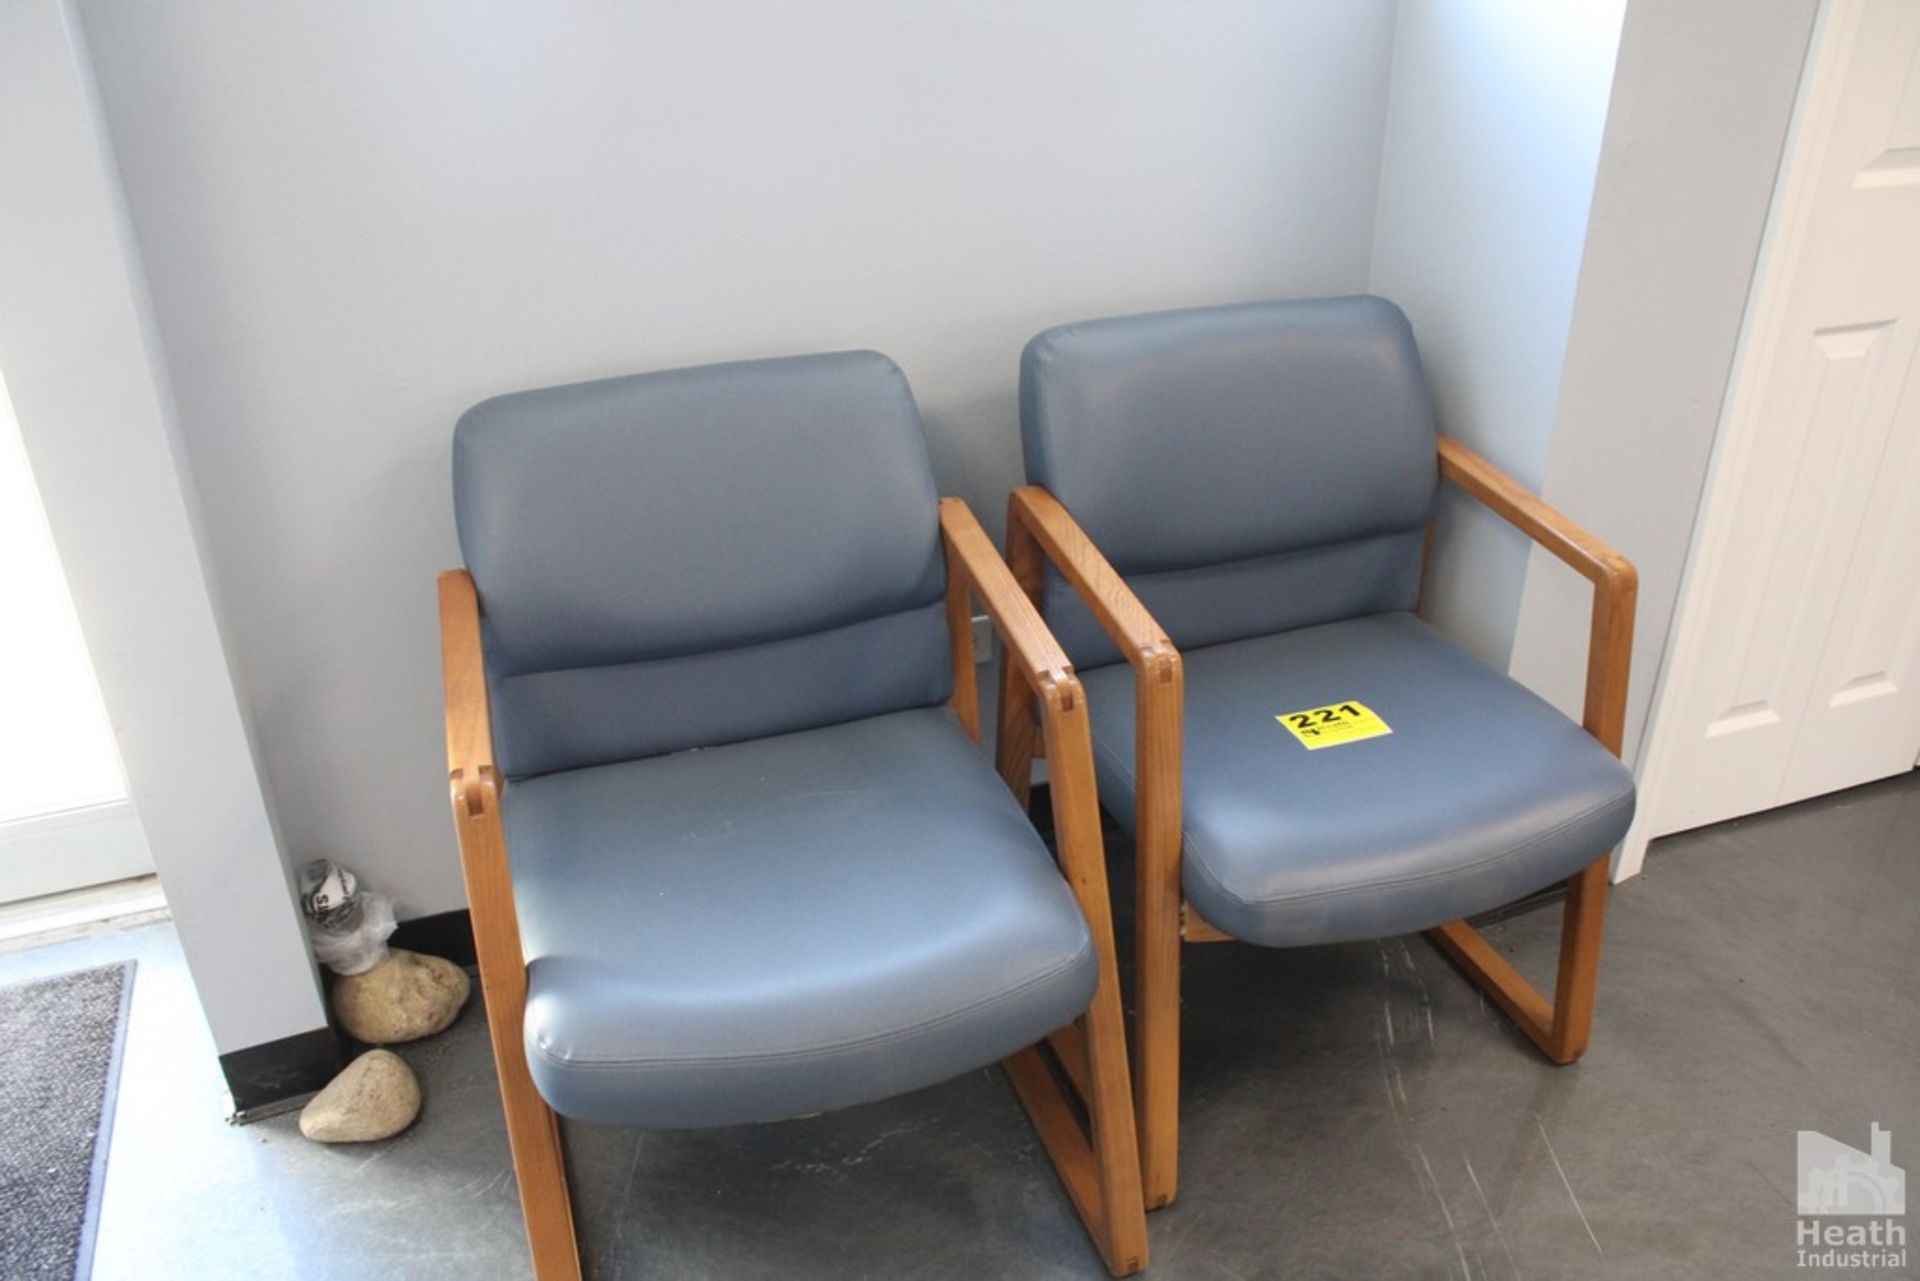 (2) WAITING AREA ARM CHAIRS